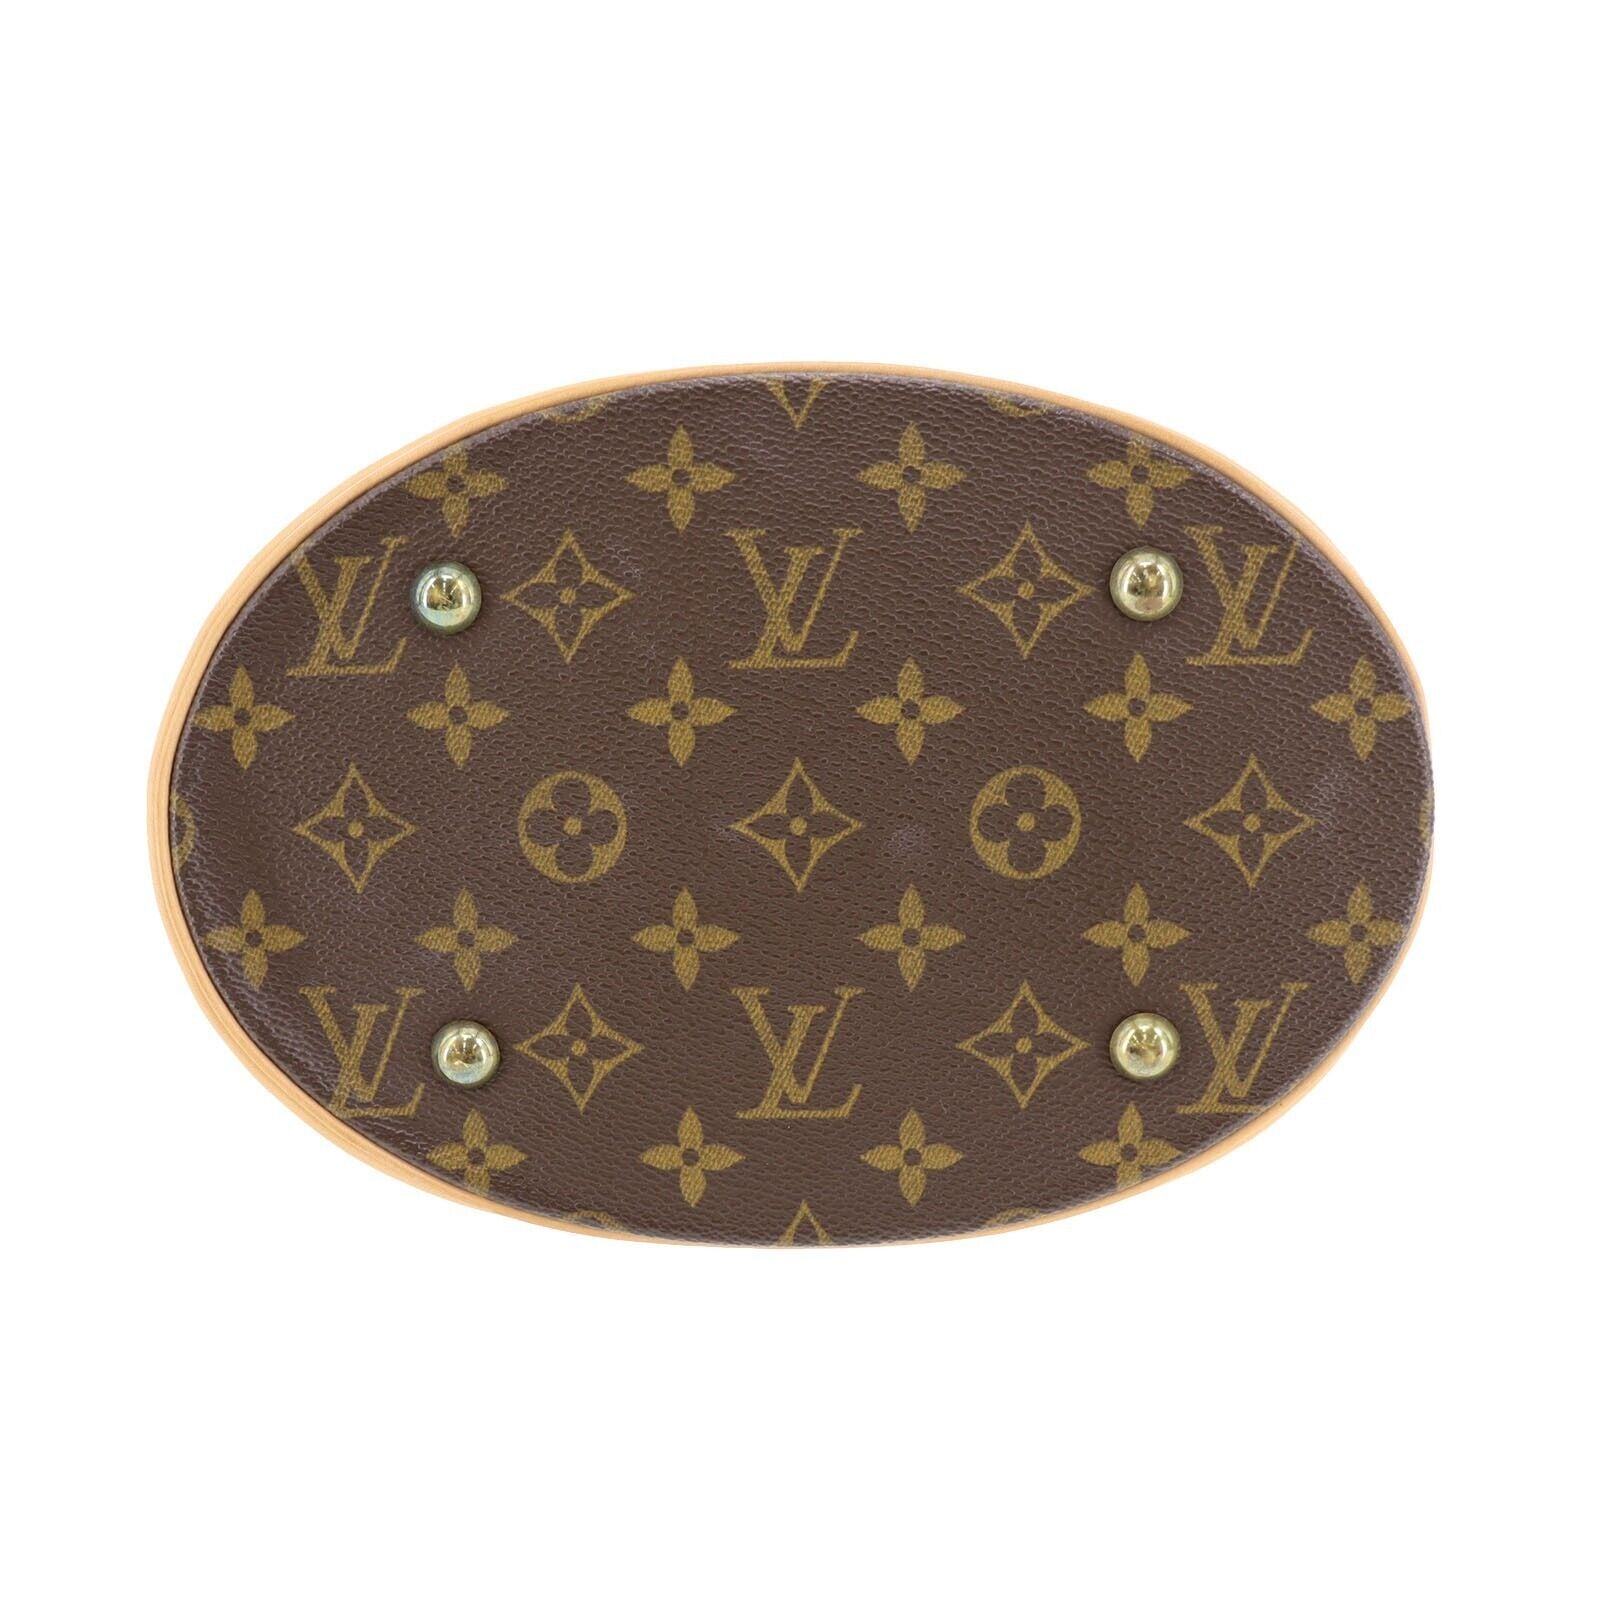 Buy [Used] LOUIS VUITTON Bucket PM Bucket Type Tote Bag with